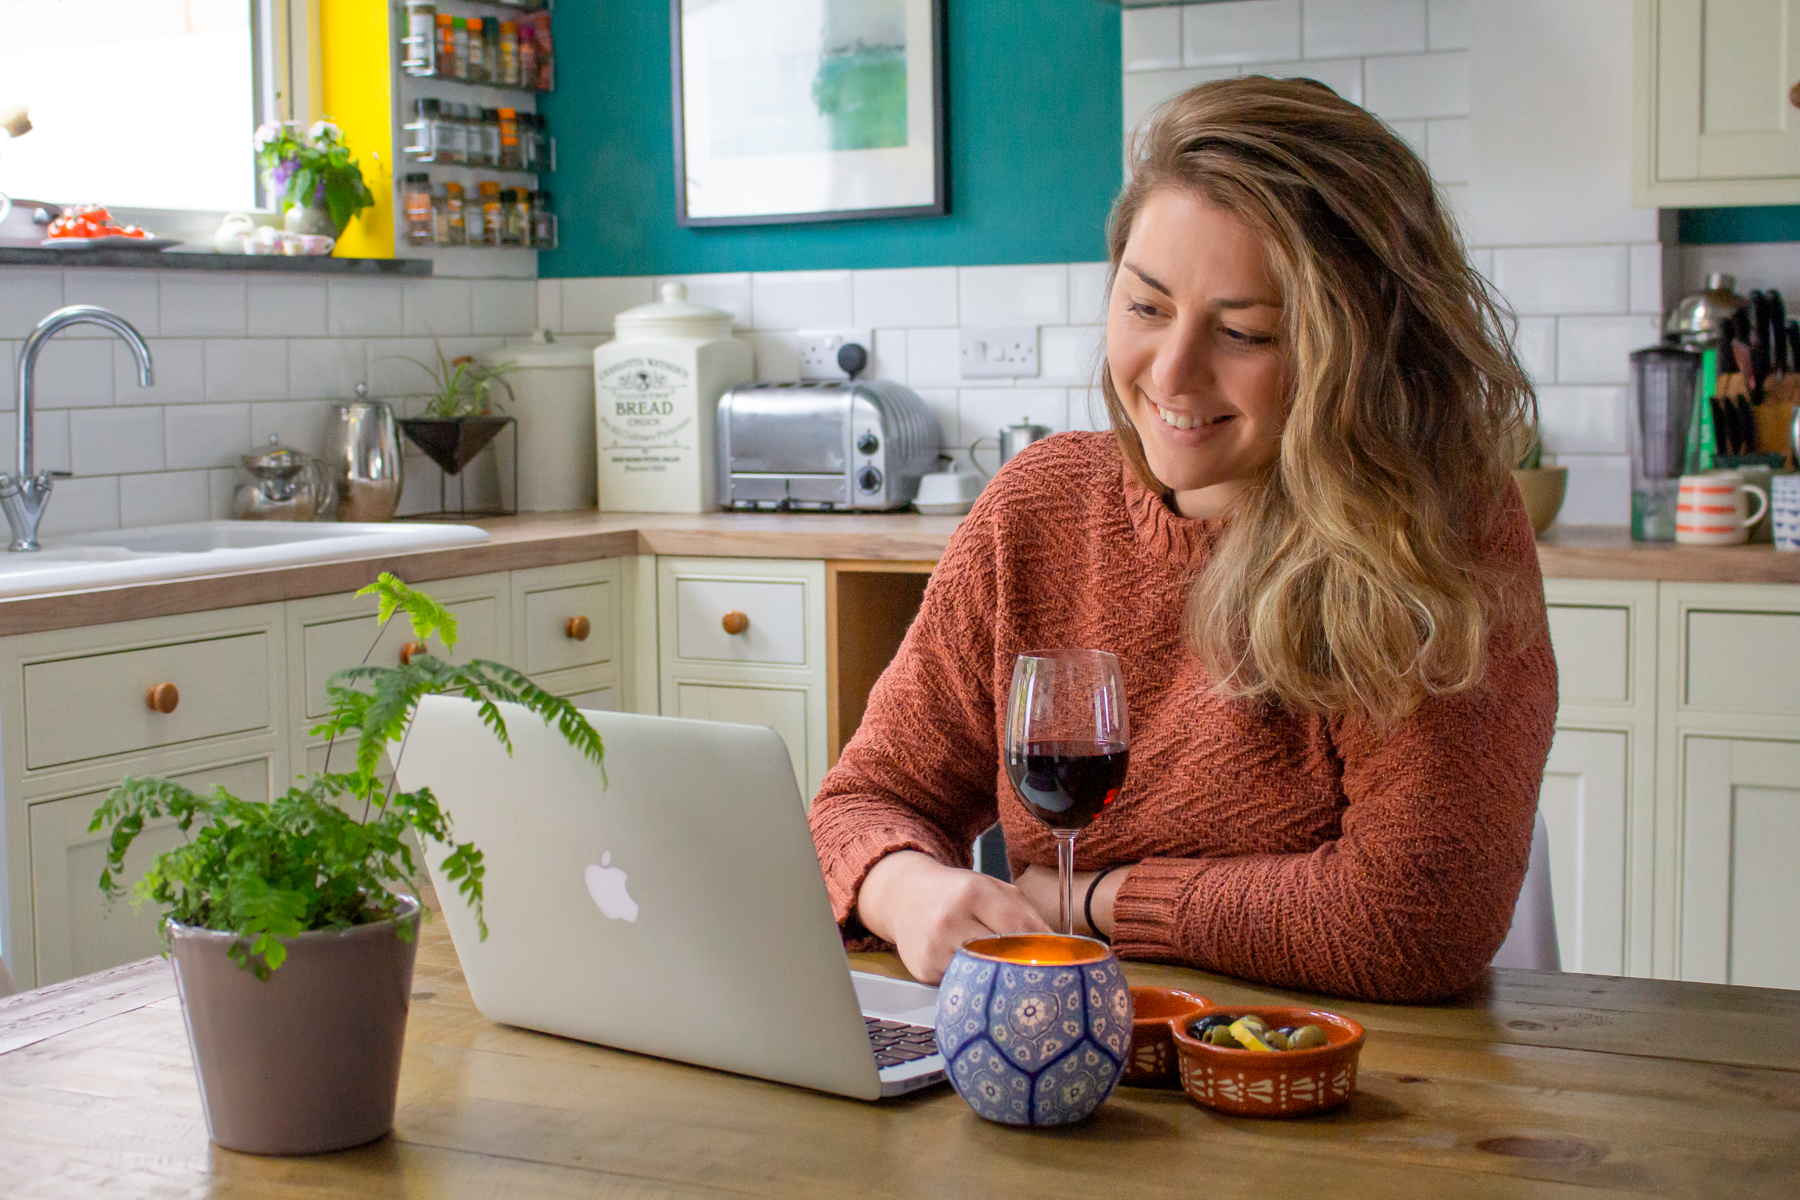 Lady on Laptop with Wine in Kitchen